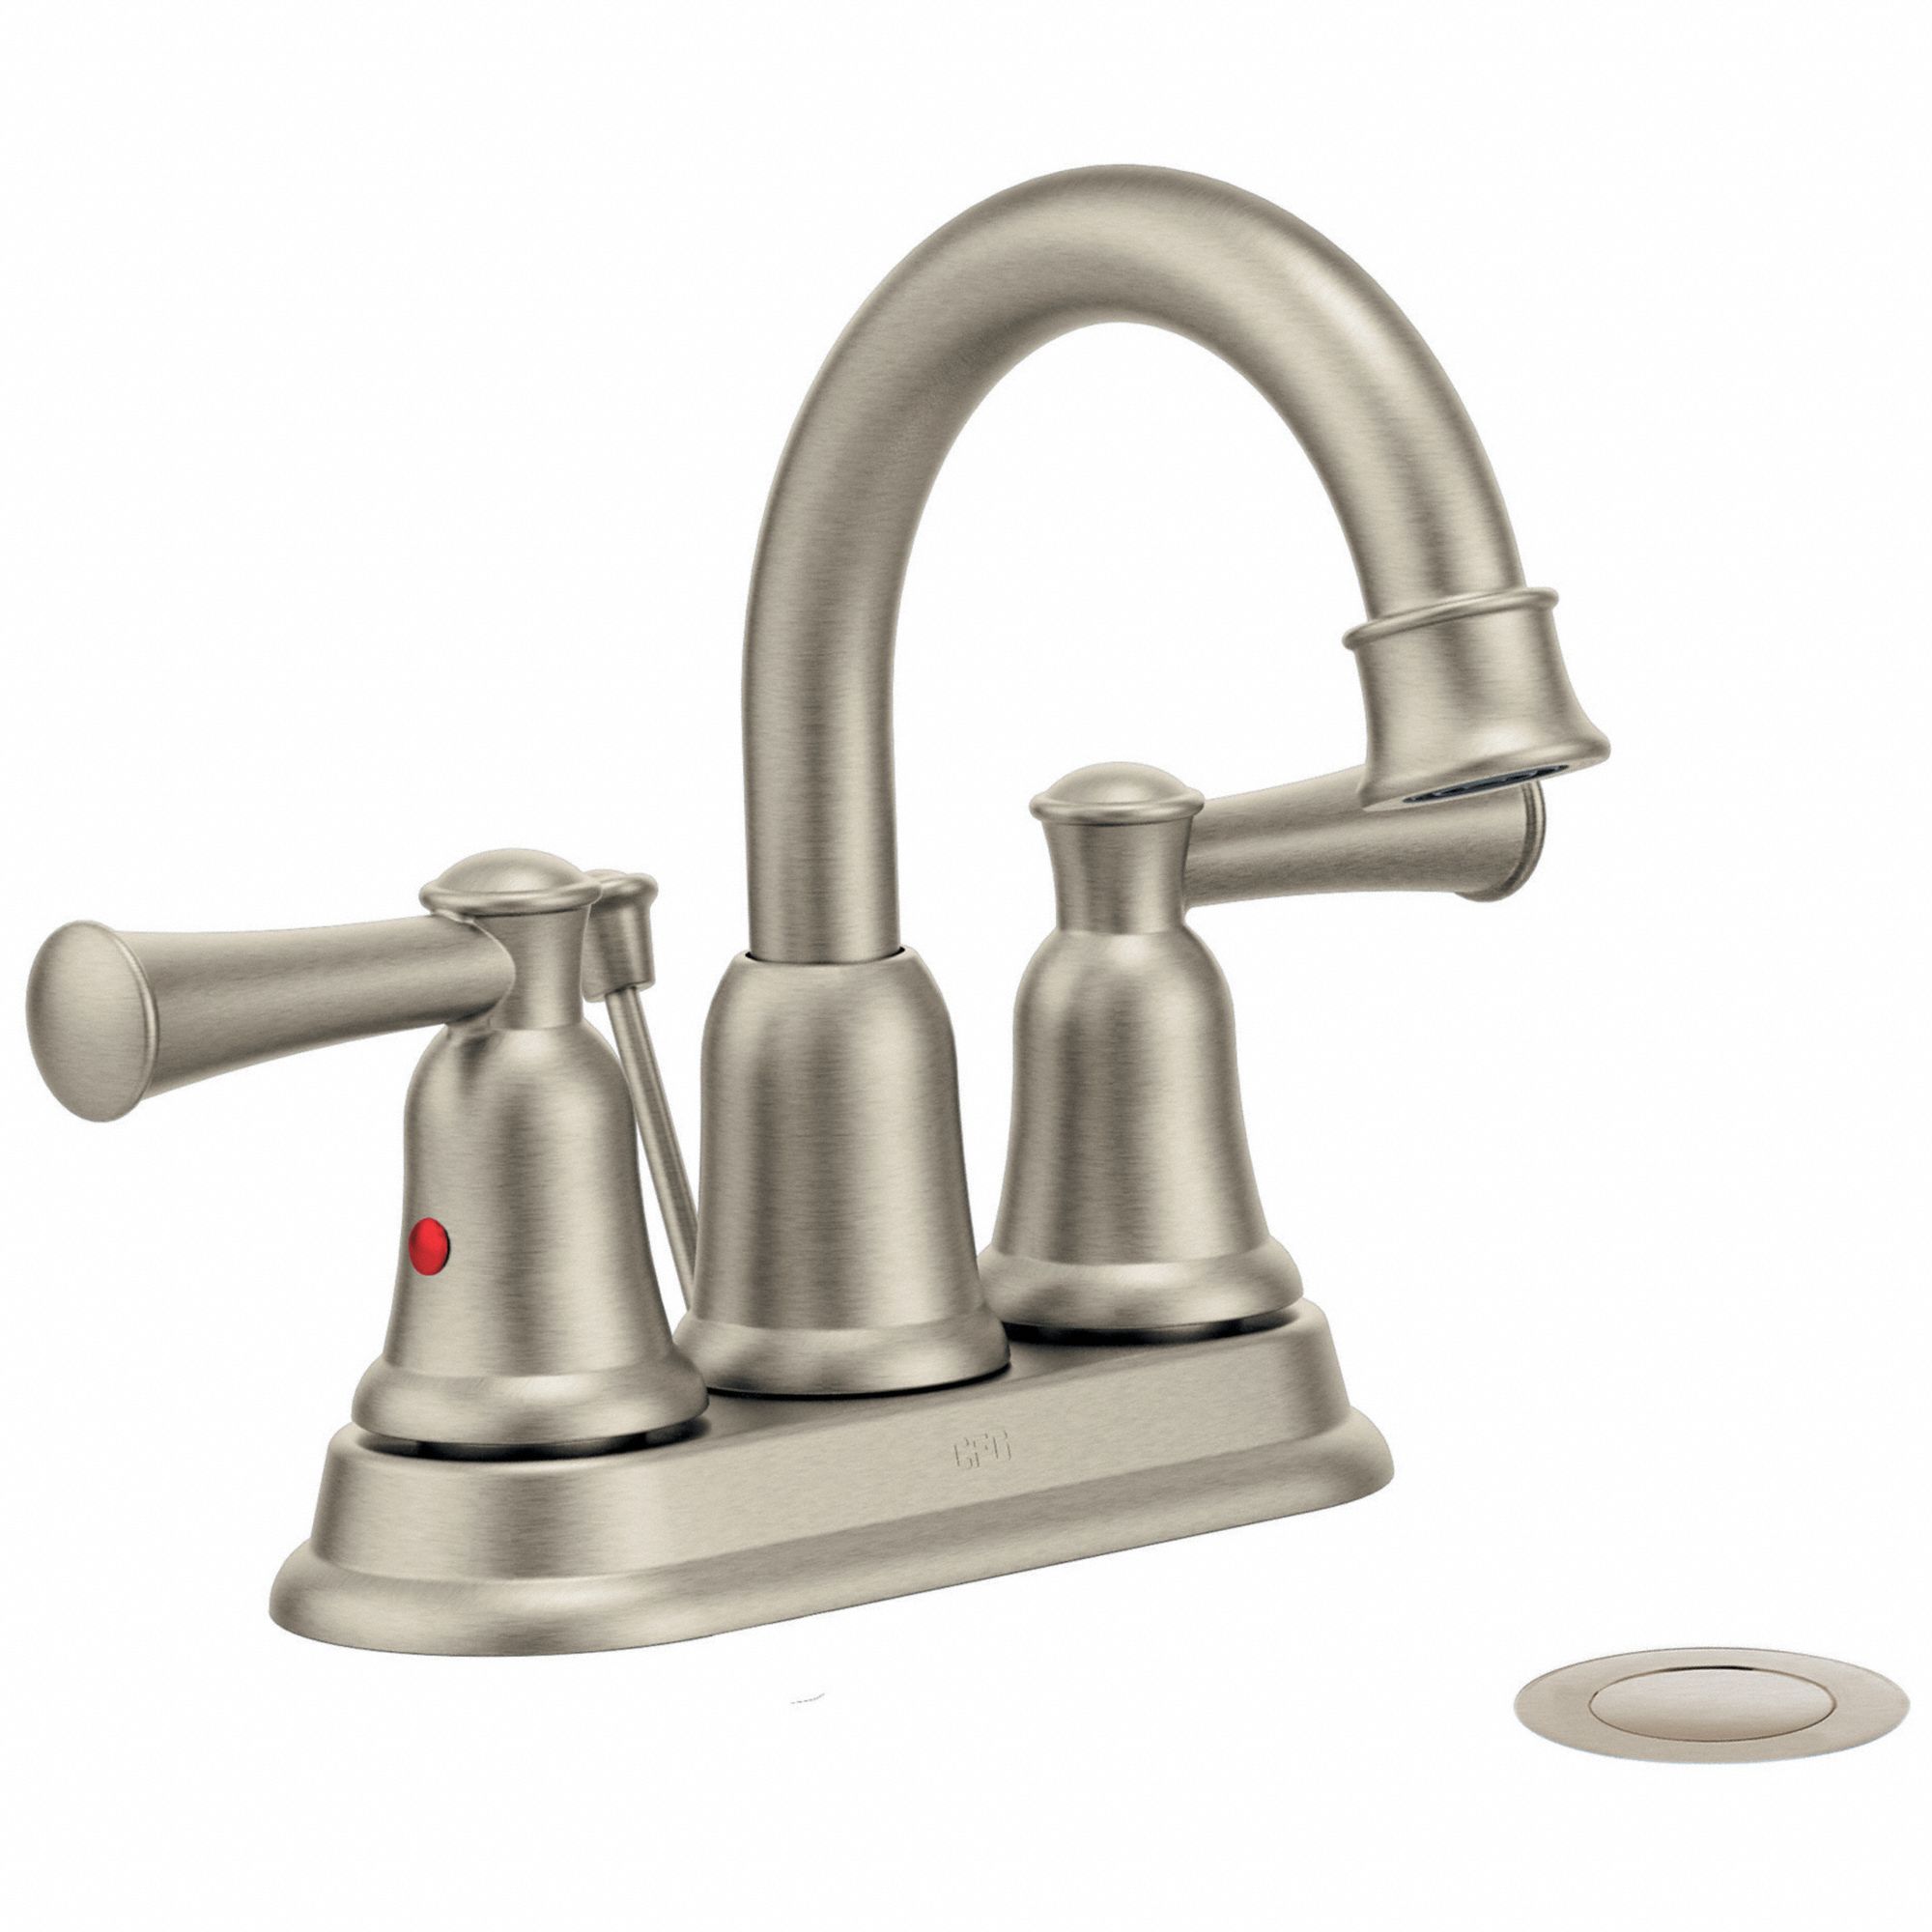 Bathroom Faucet: Cornerstone®, Brushed Nickel Finish, 1.5 gpm Flow Rate, Manual